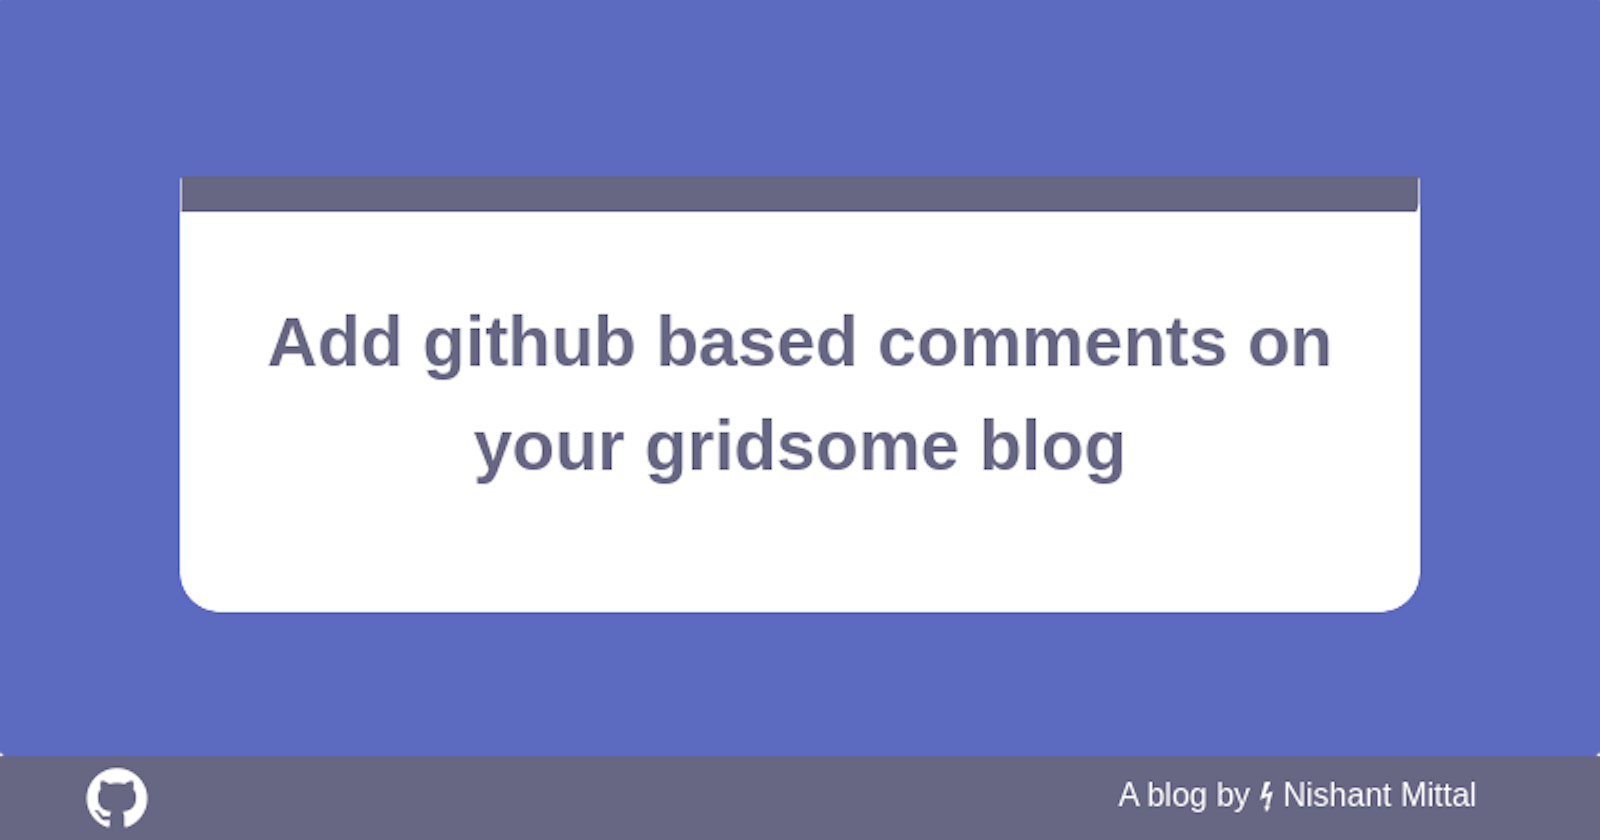 Add github based comments on your gridsome blog